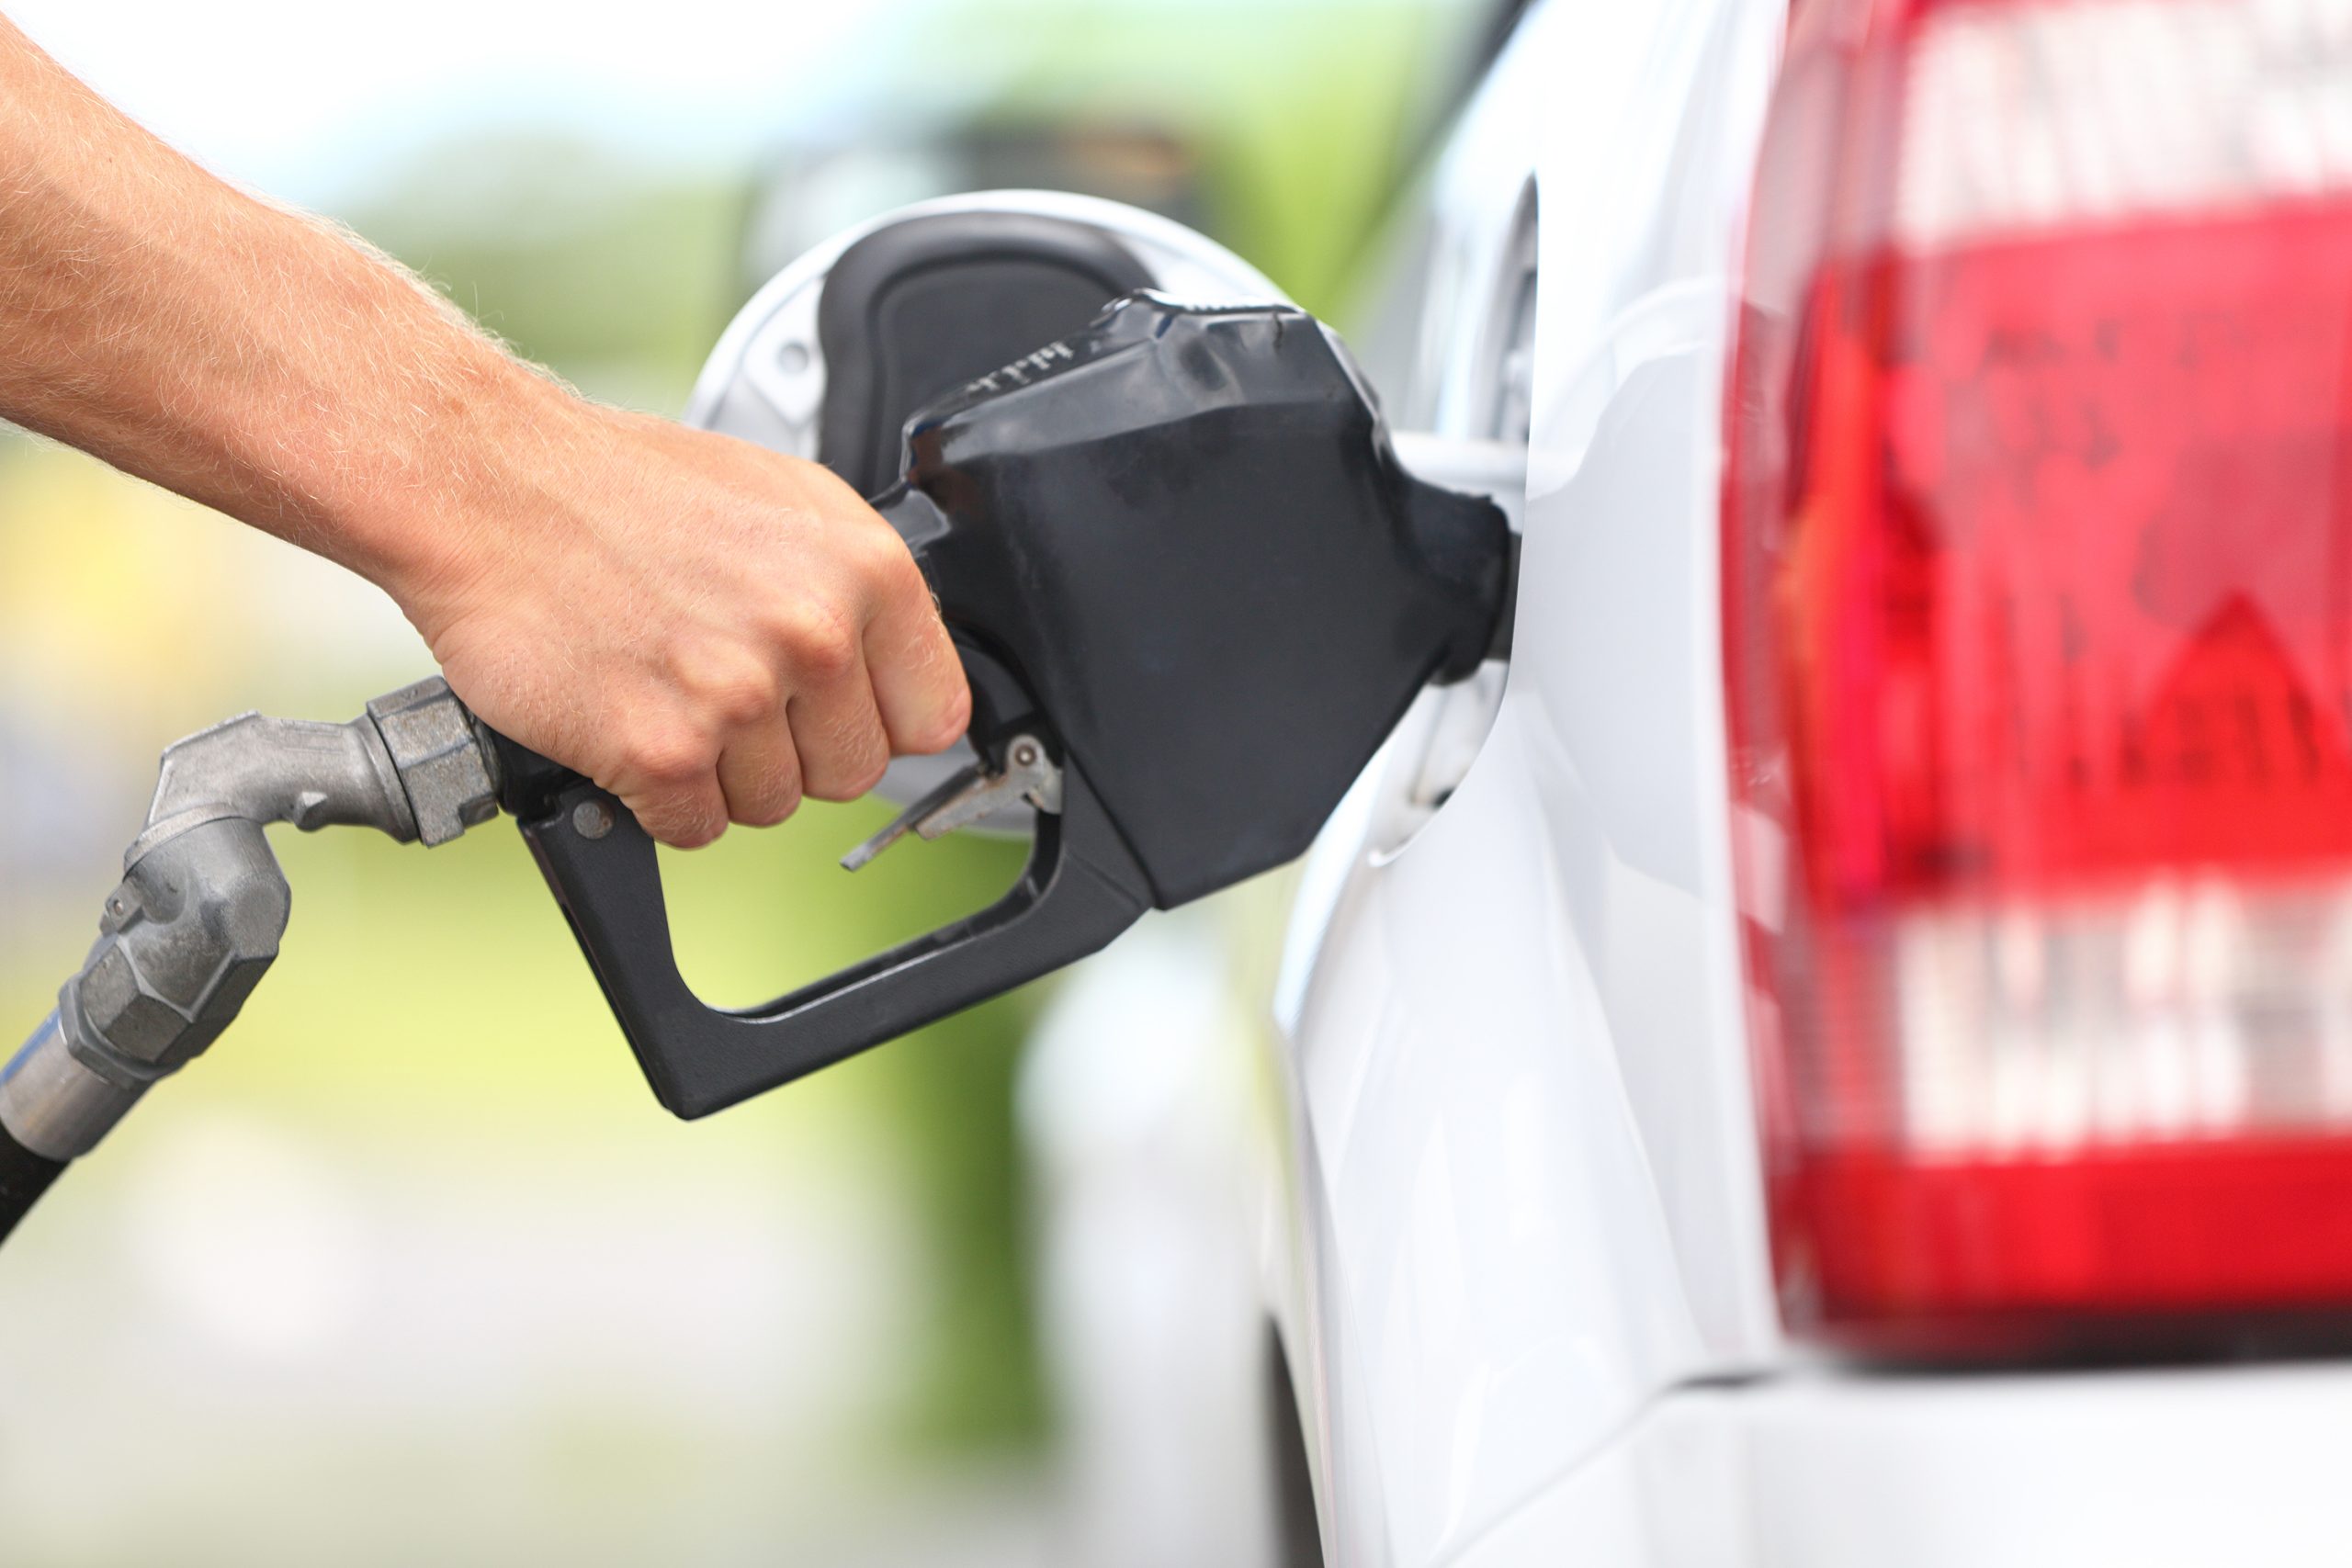 10 Tips to Save Gas and Spend Less Money at the Pump